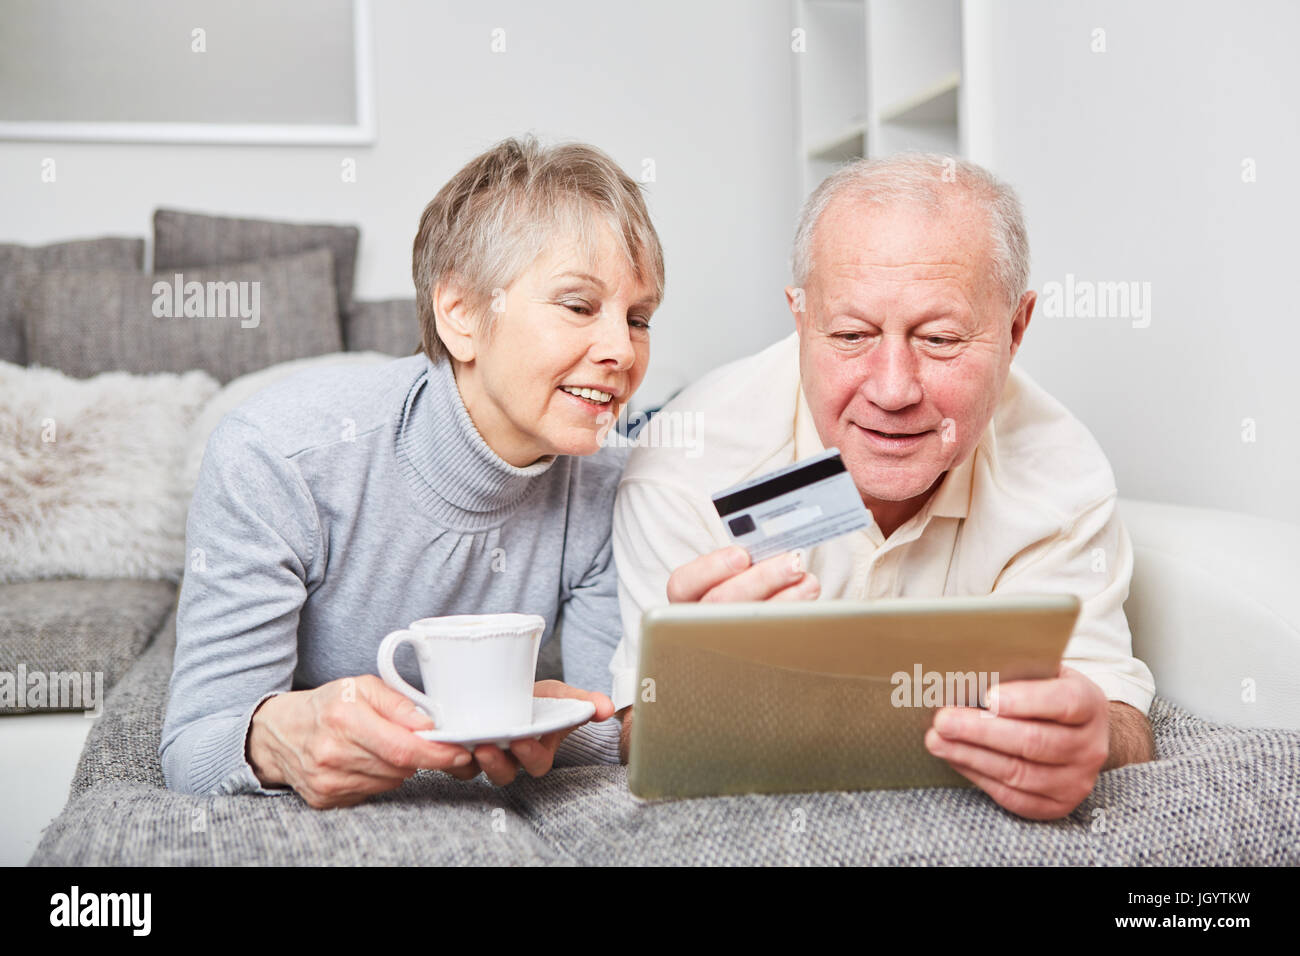 E-commerce concept with senior couple shopping online using credit card Stock Photo